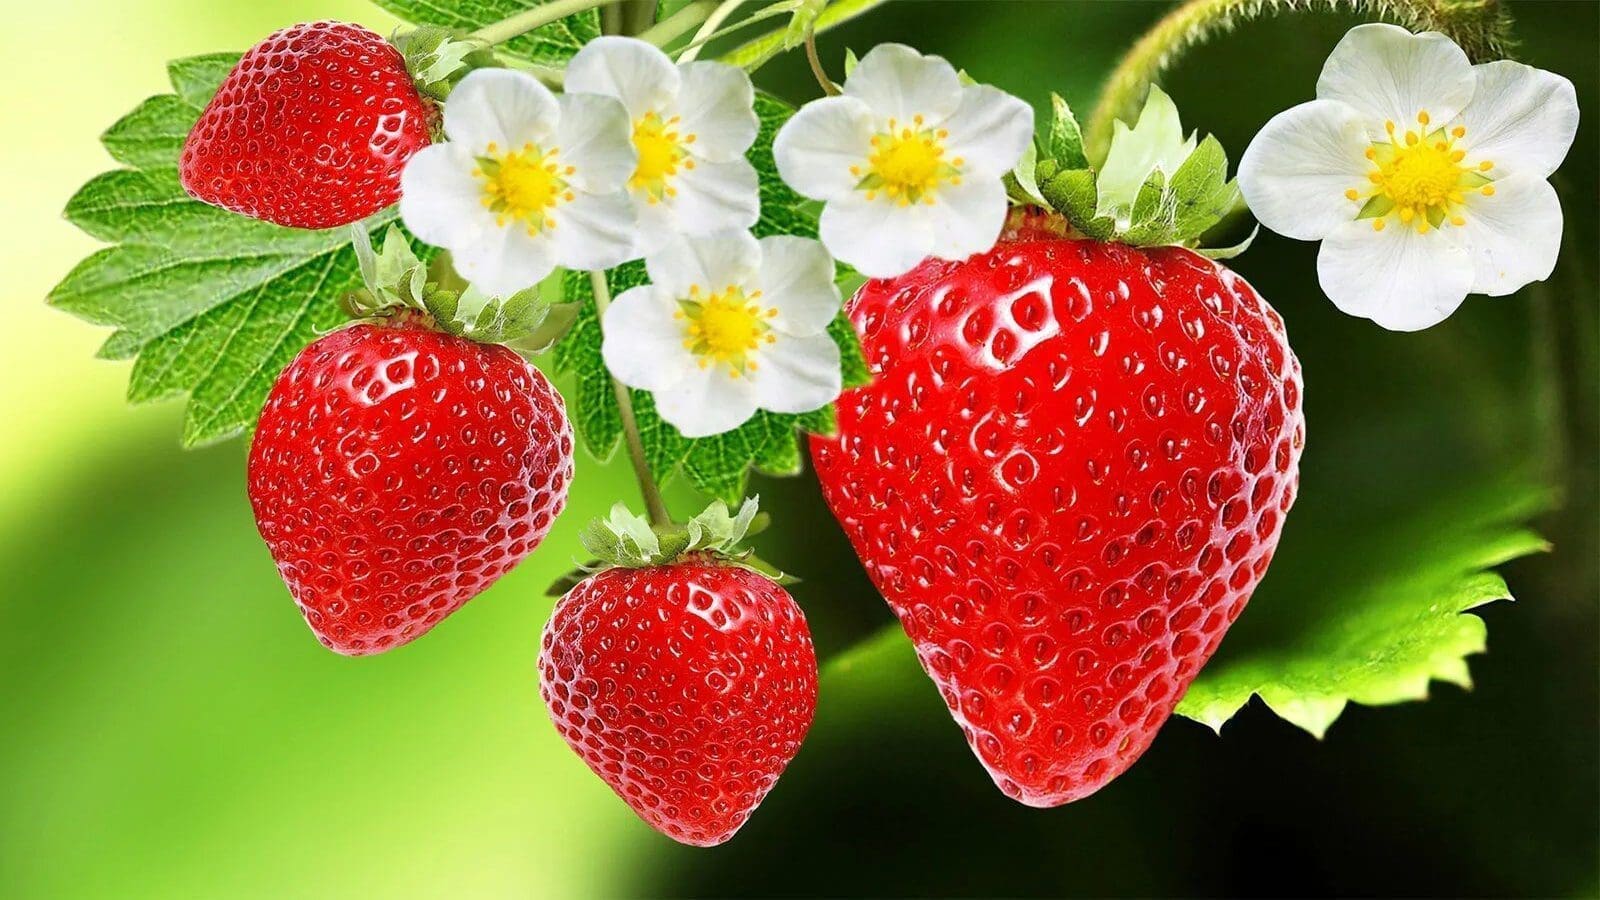 Thailand researchers develop edible CBD coating to extend strawberries’ shelf life